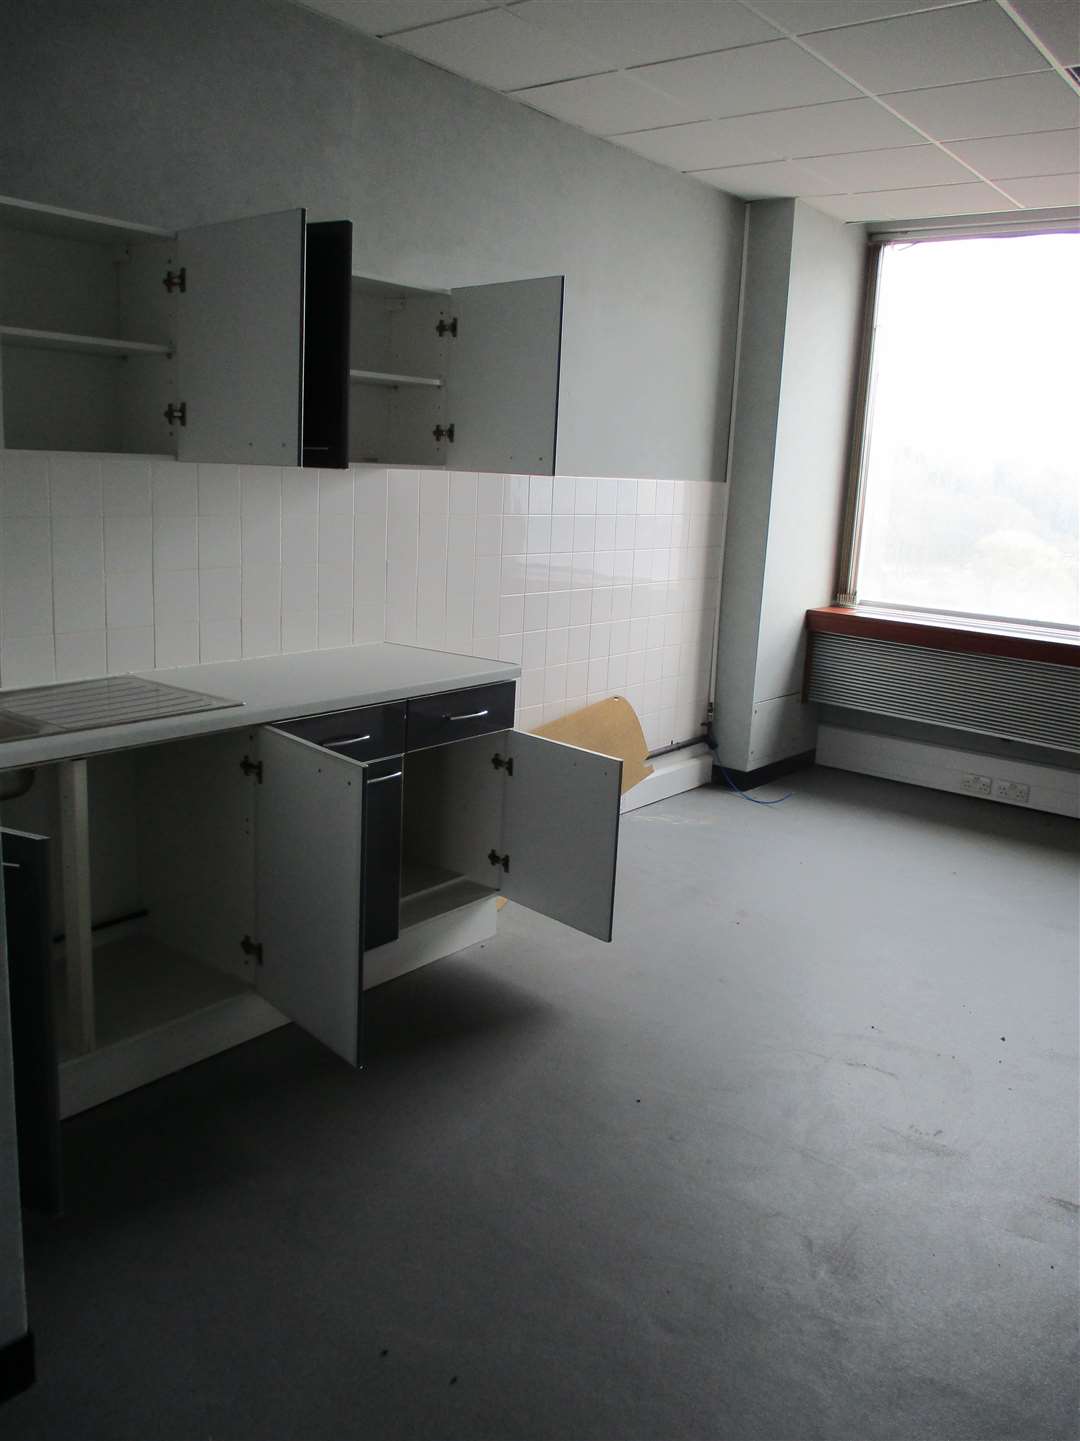 What appears to be an old staff kitchen/ break area. Picture: Medway council